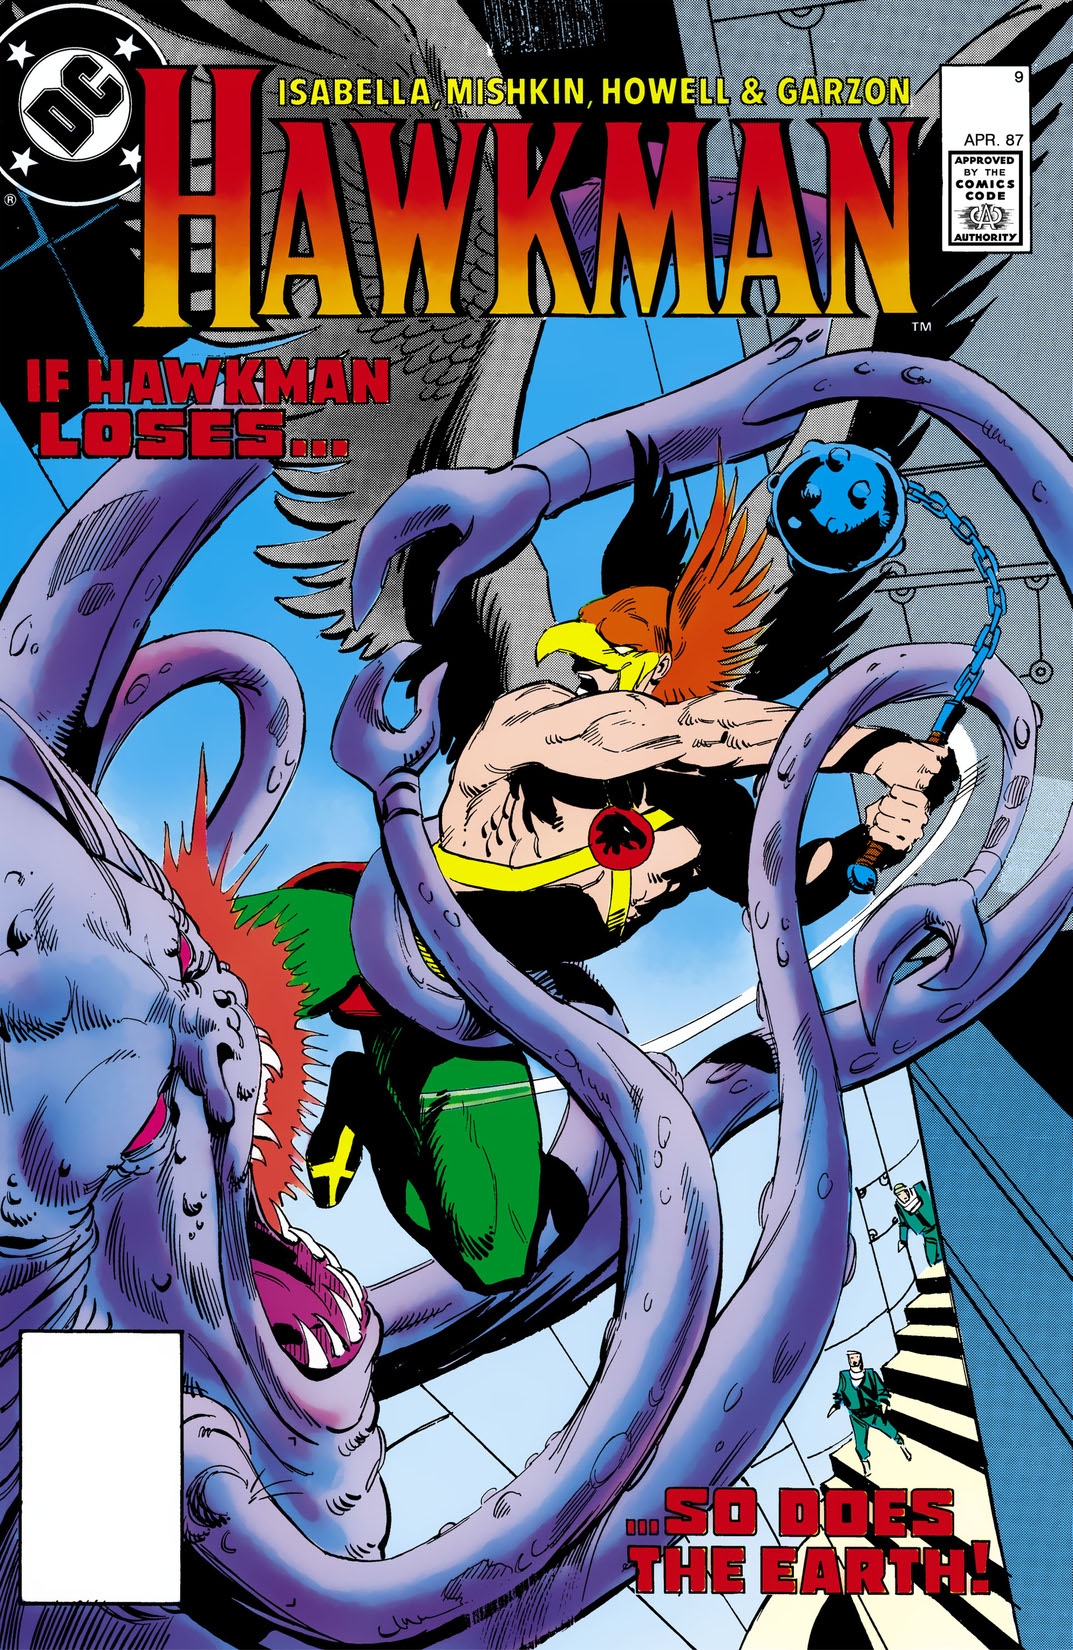 Hawkman (1986-) #9 preview images